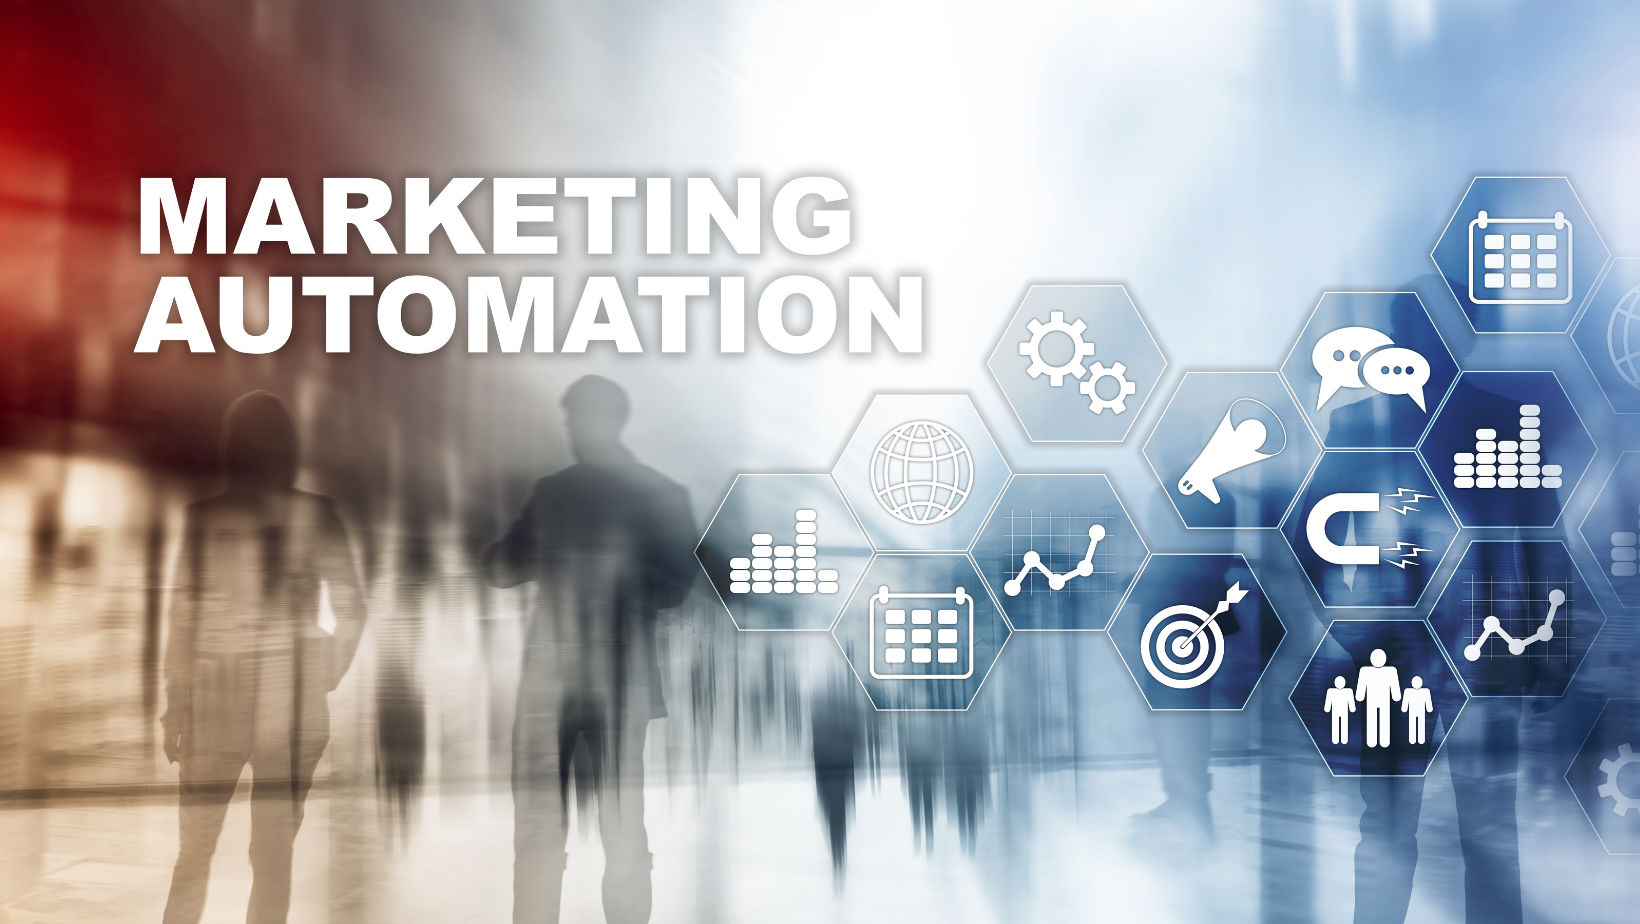 How can marketing automation software benefit your business?